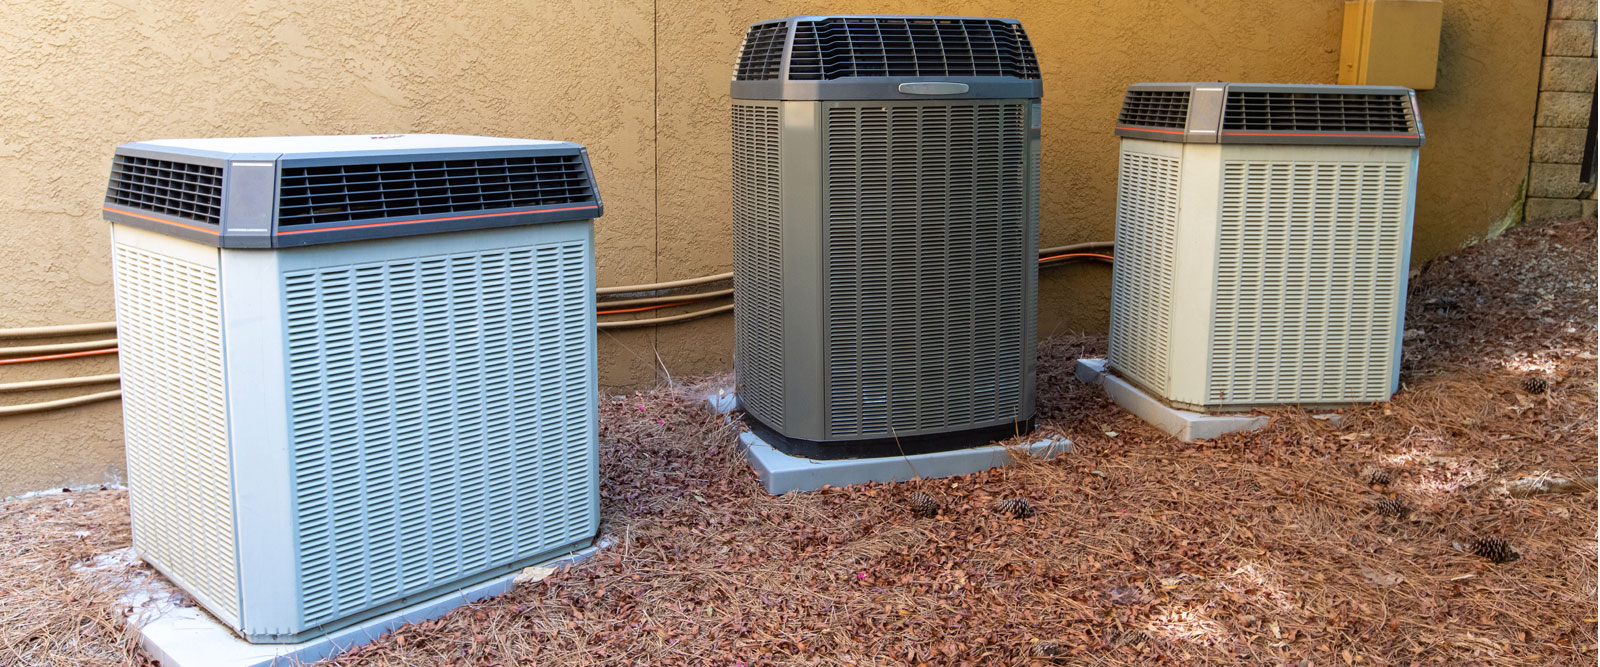 HVAC Prices in 2022 Could Be Higher